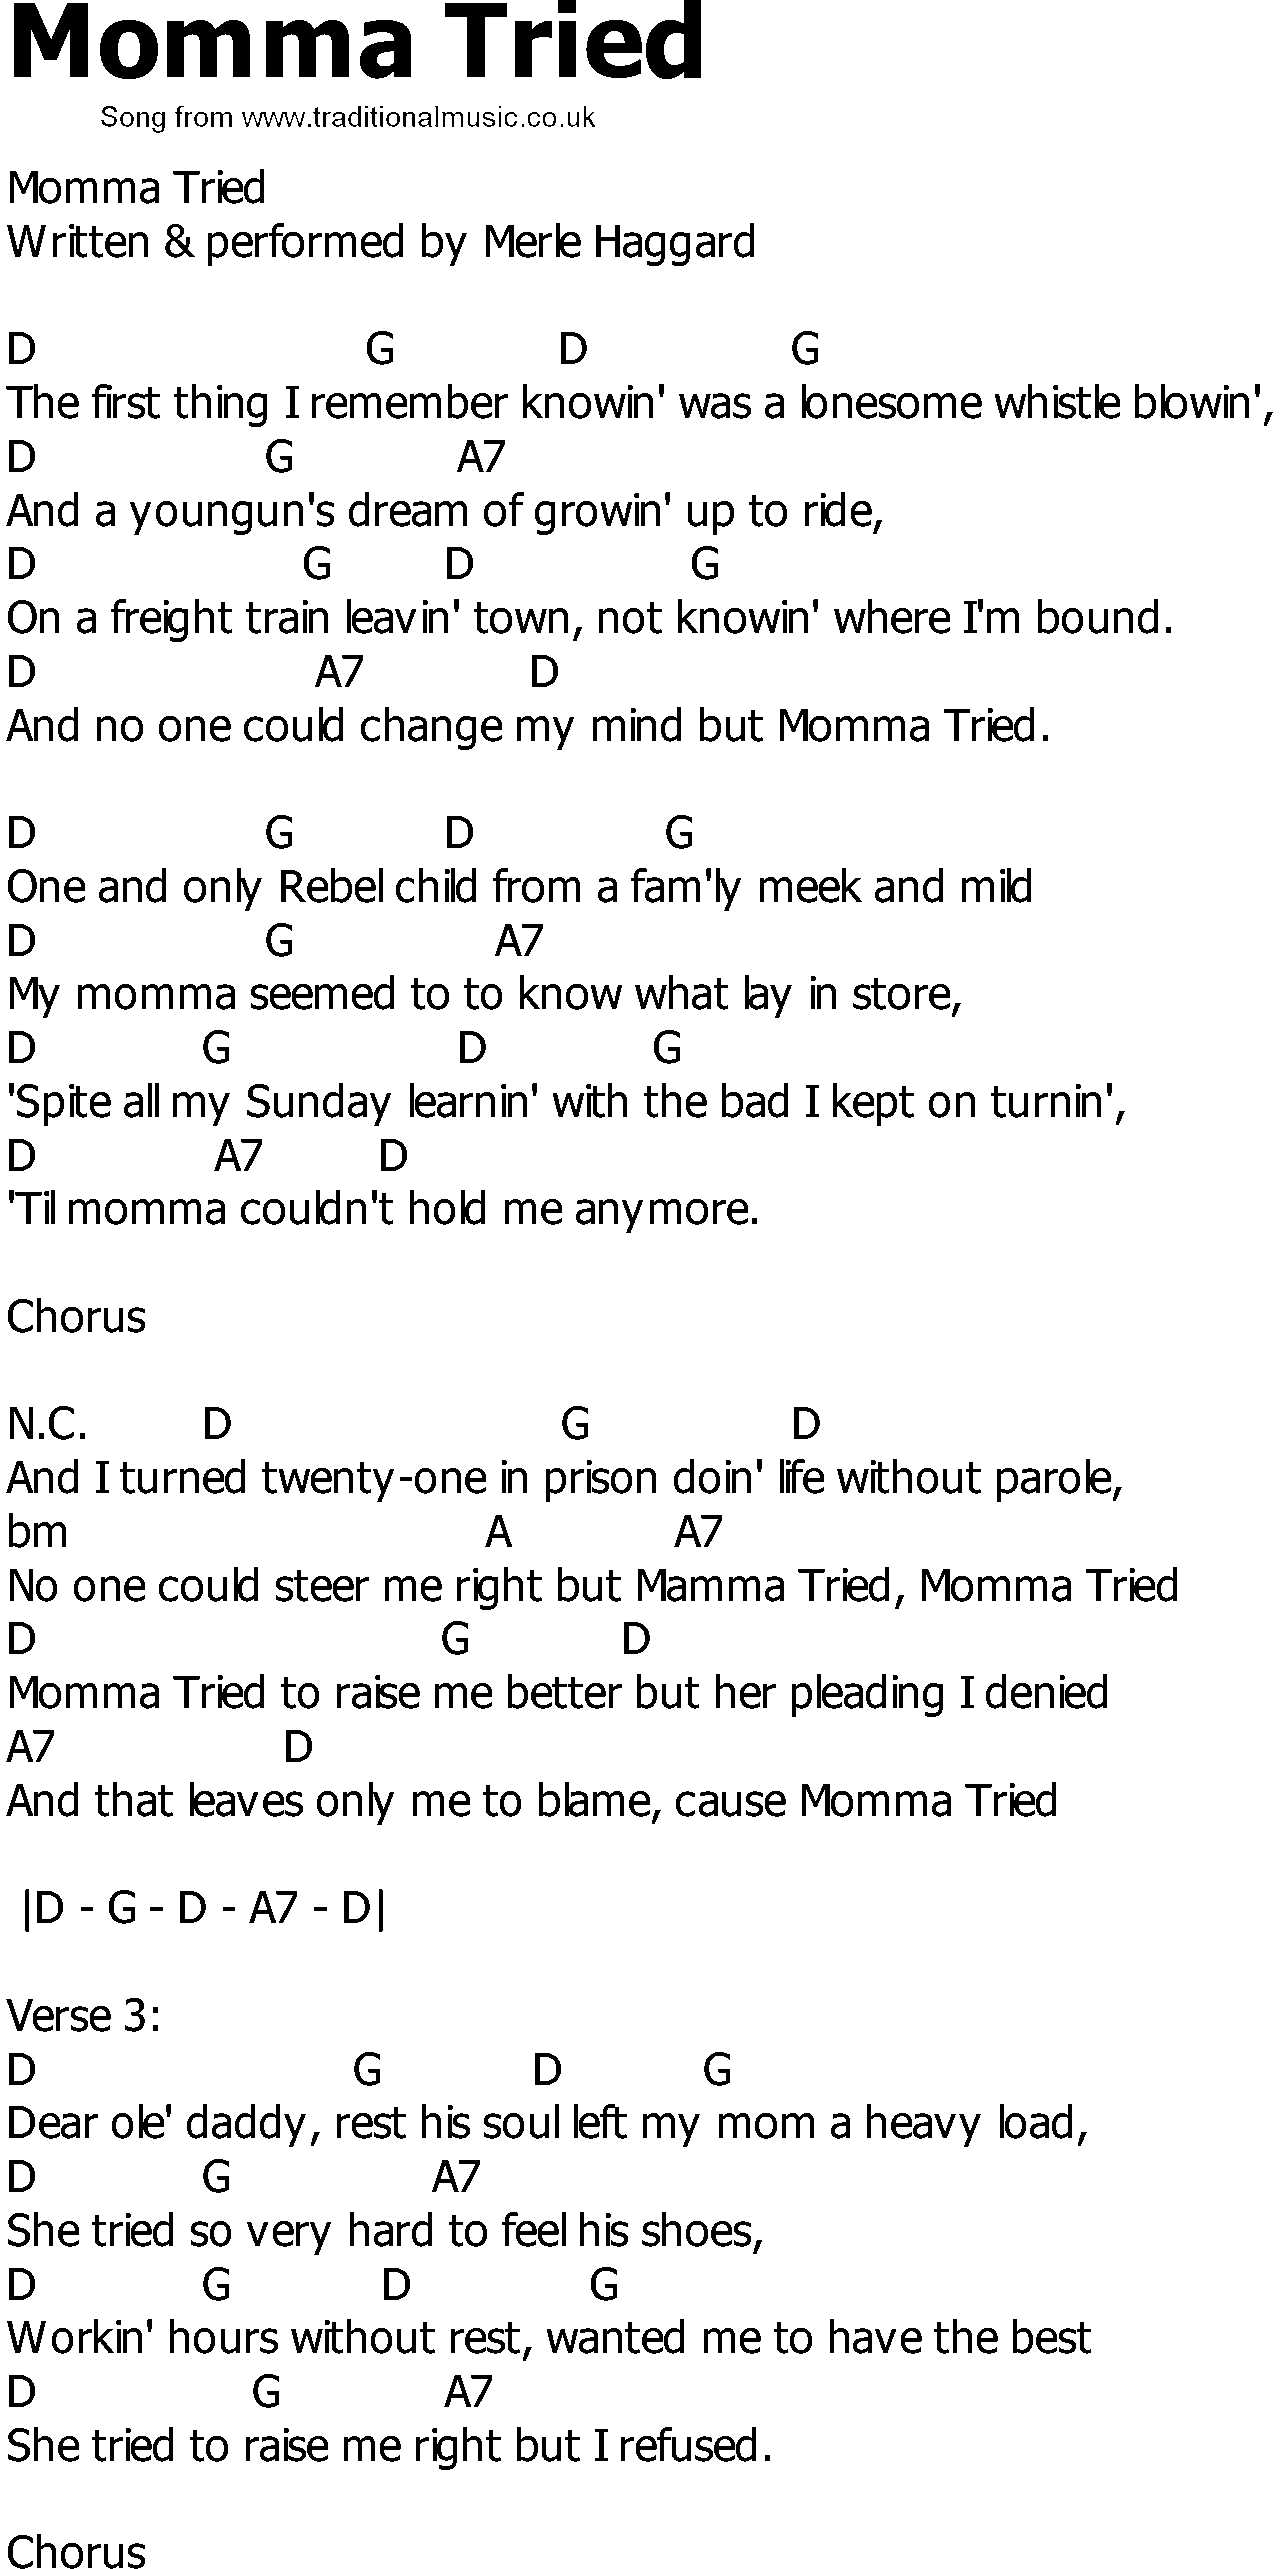 Old Country song lyrics with chords - Momma Tried